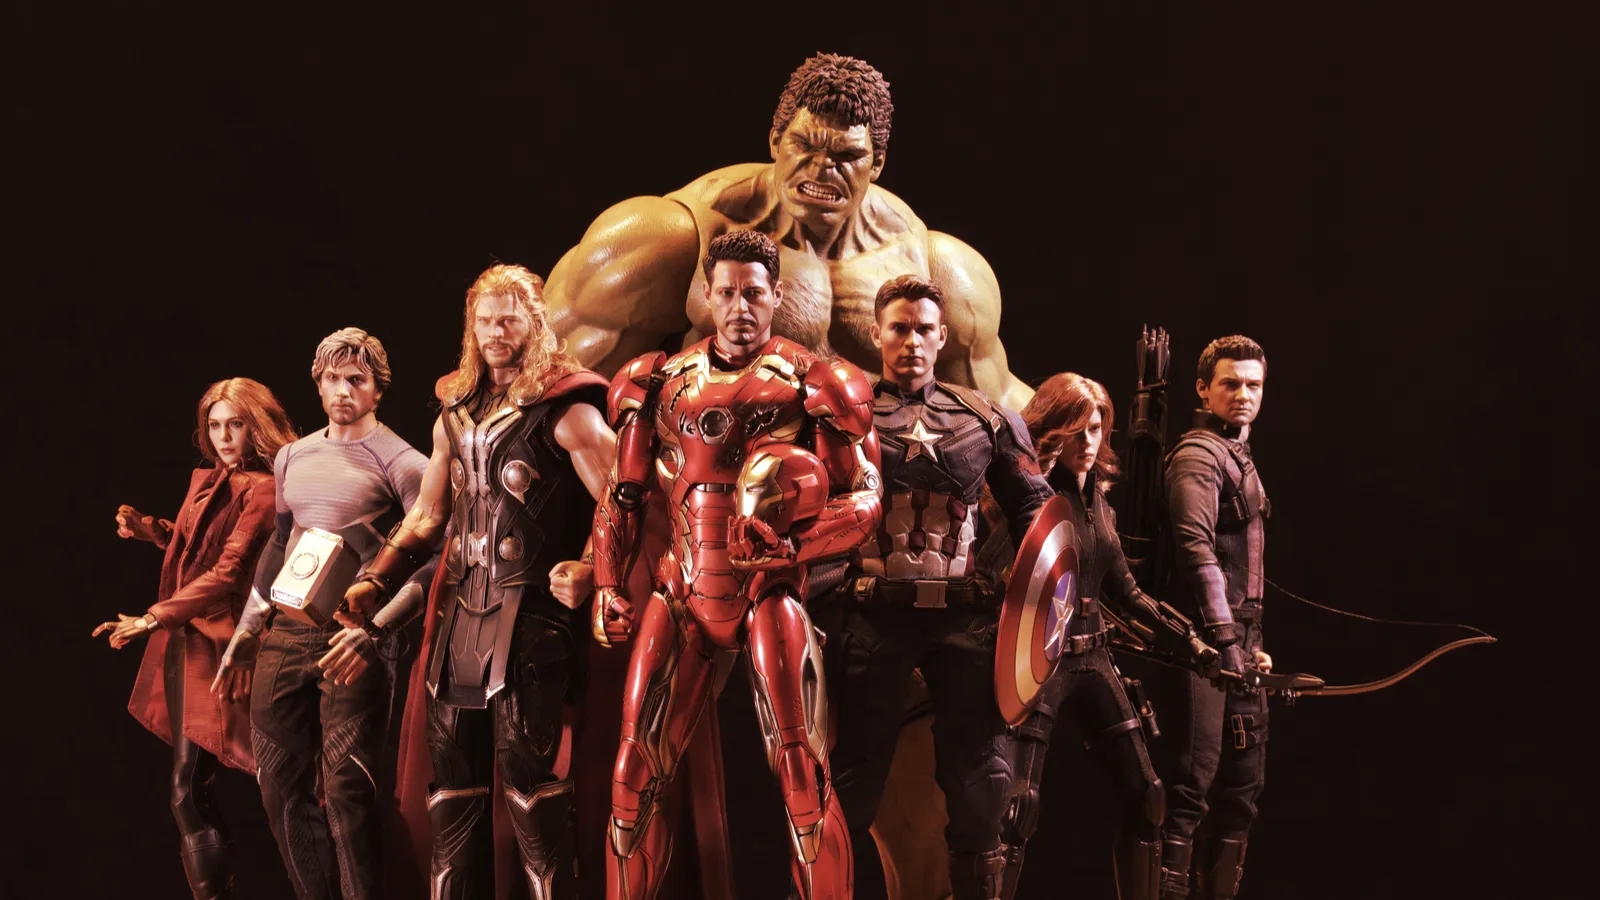 The Avengers is a Marvel property. Image: Shutterstock